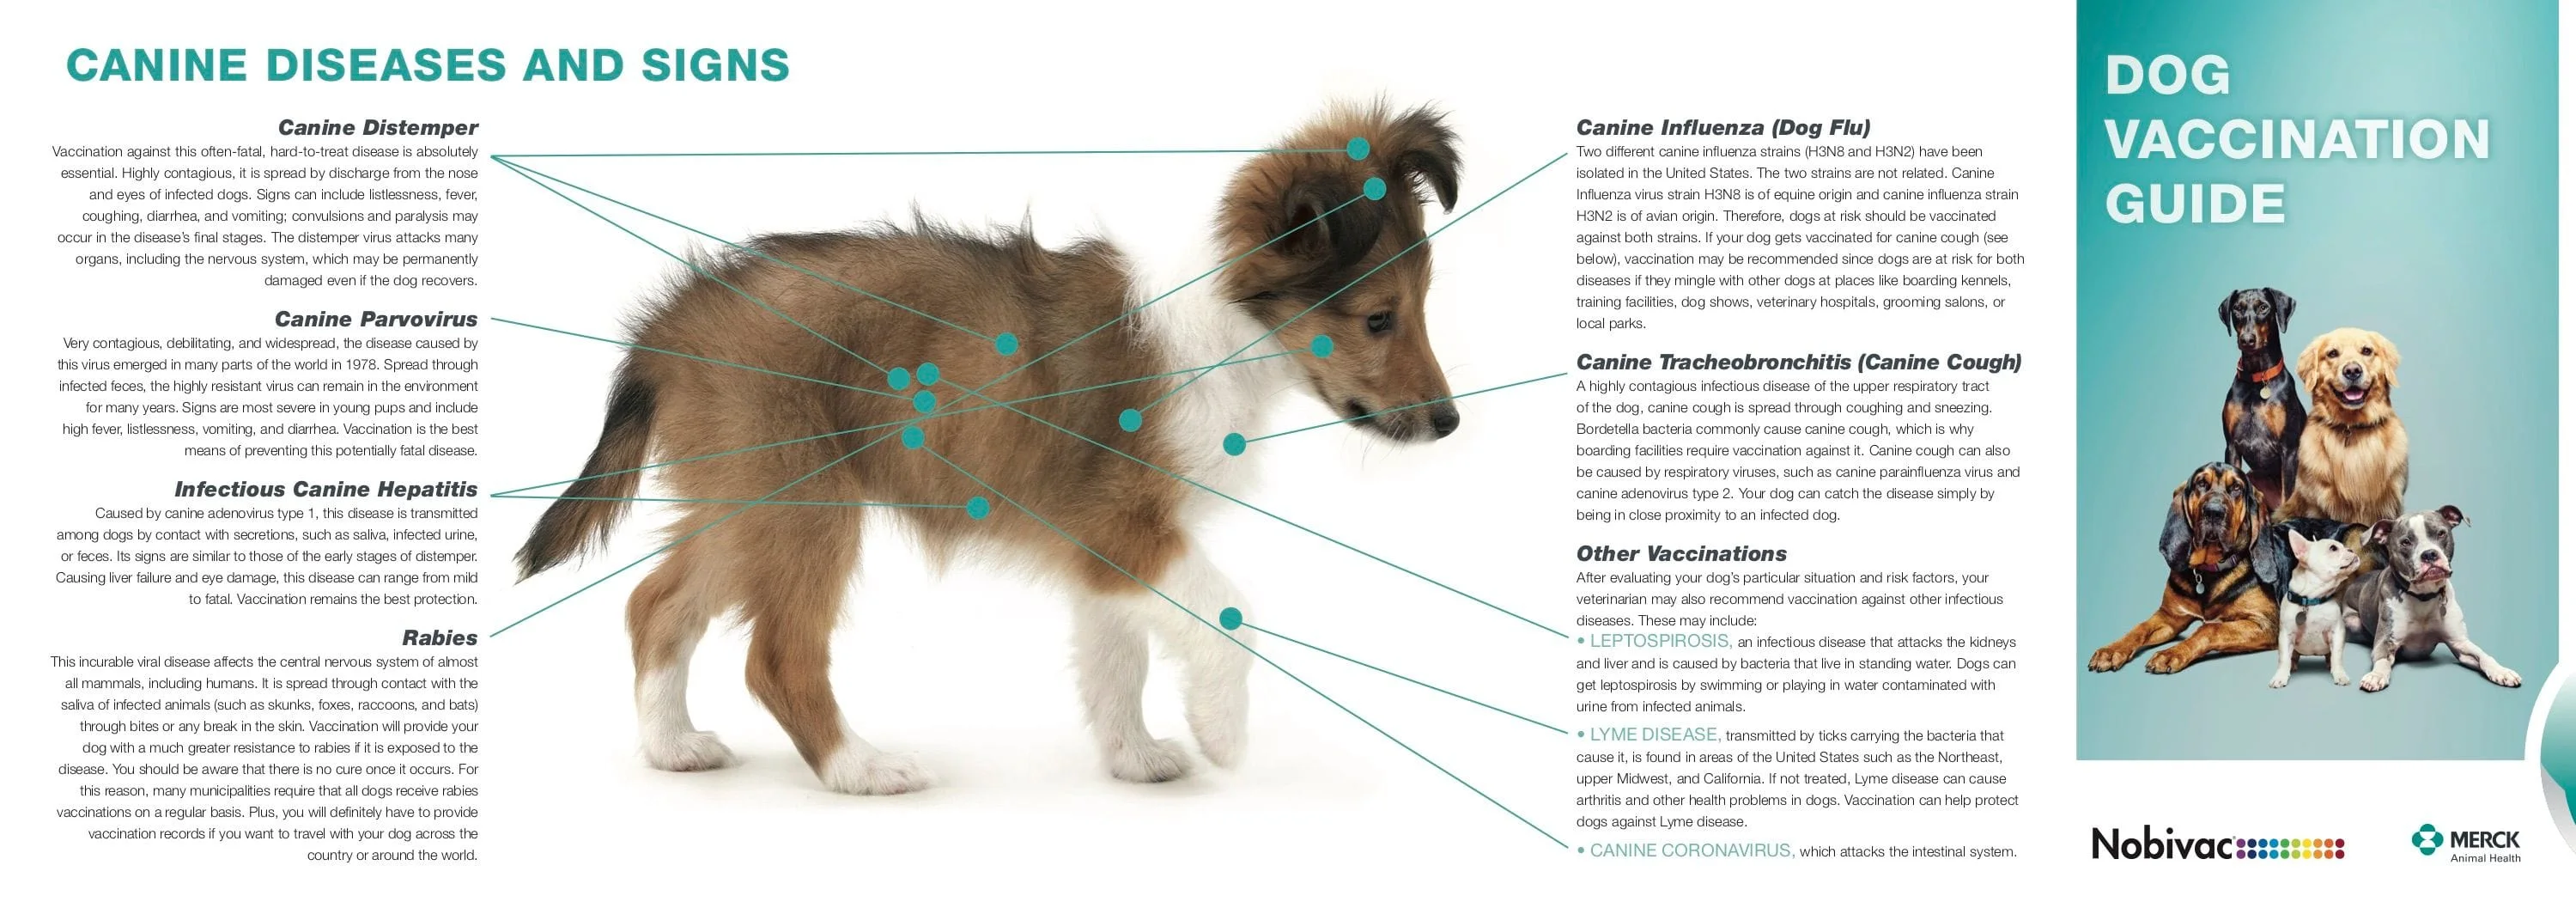 Canine Vaccine Guide